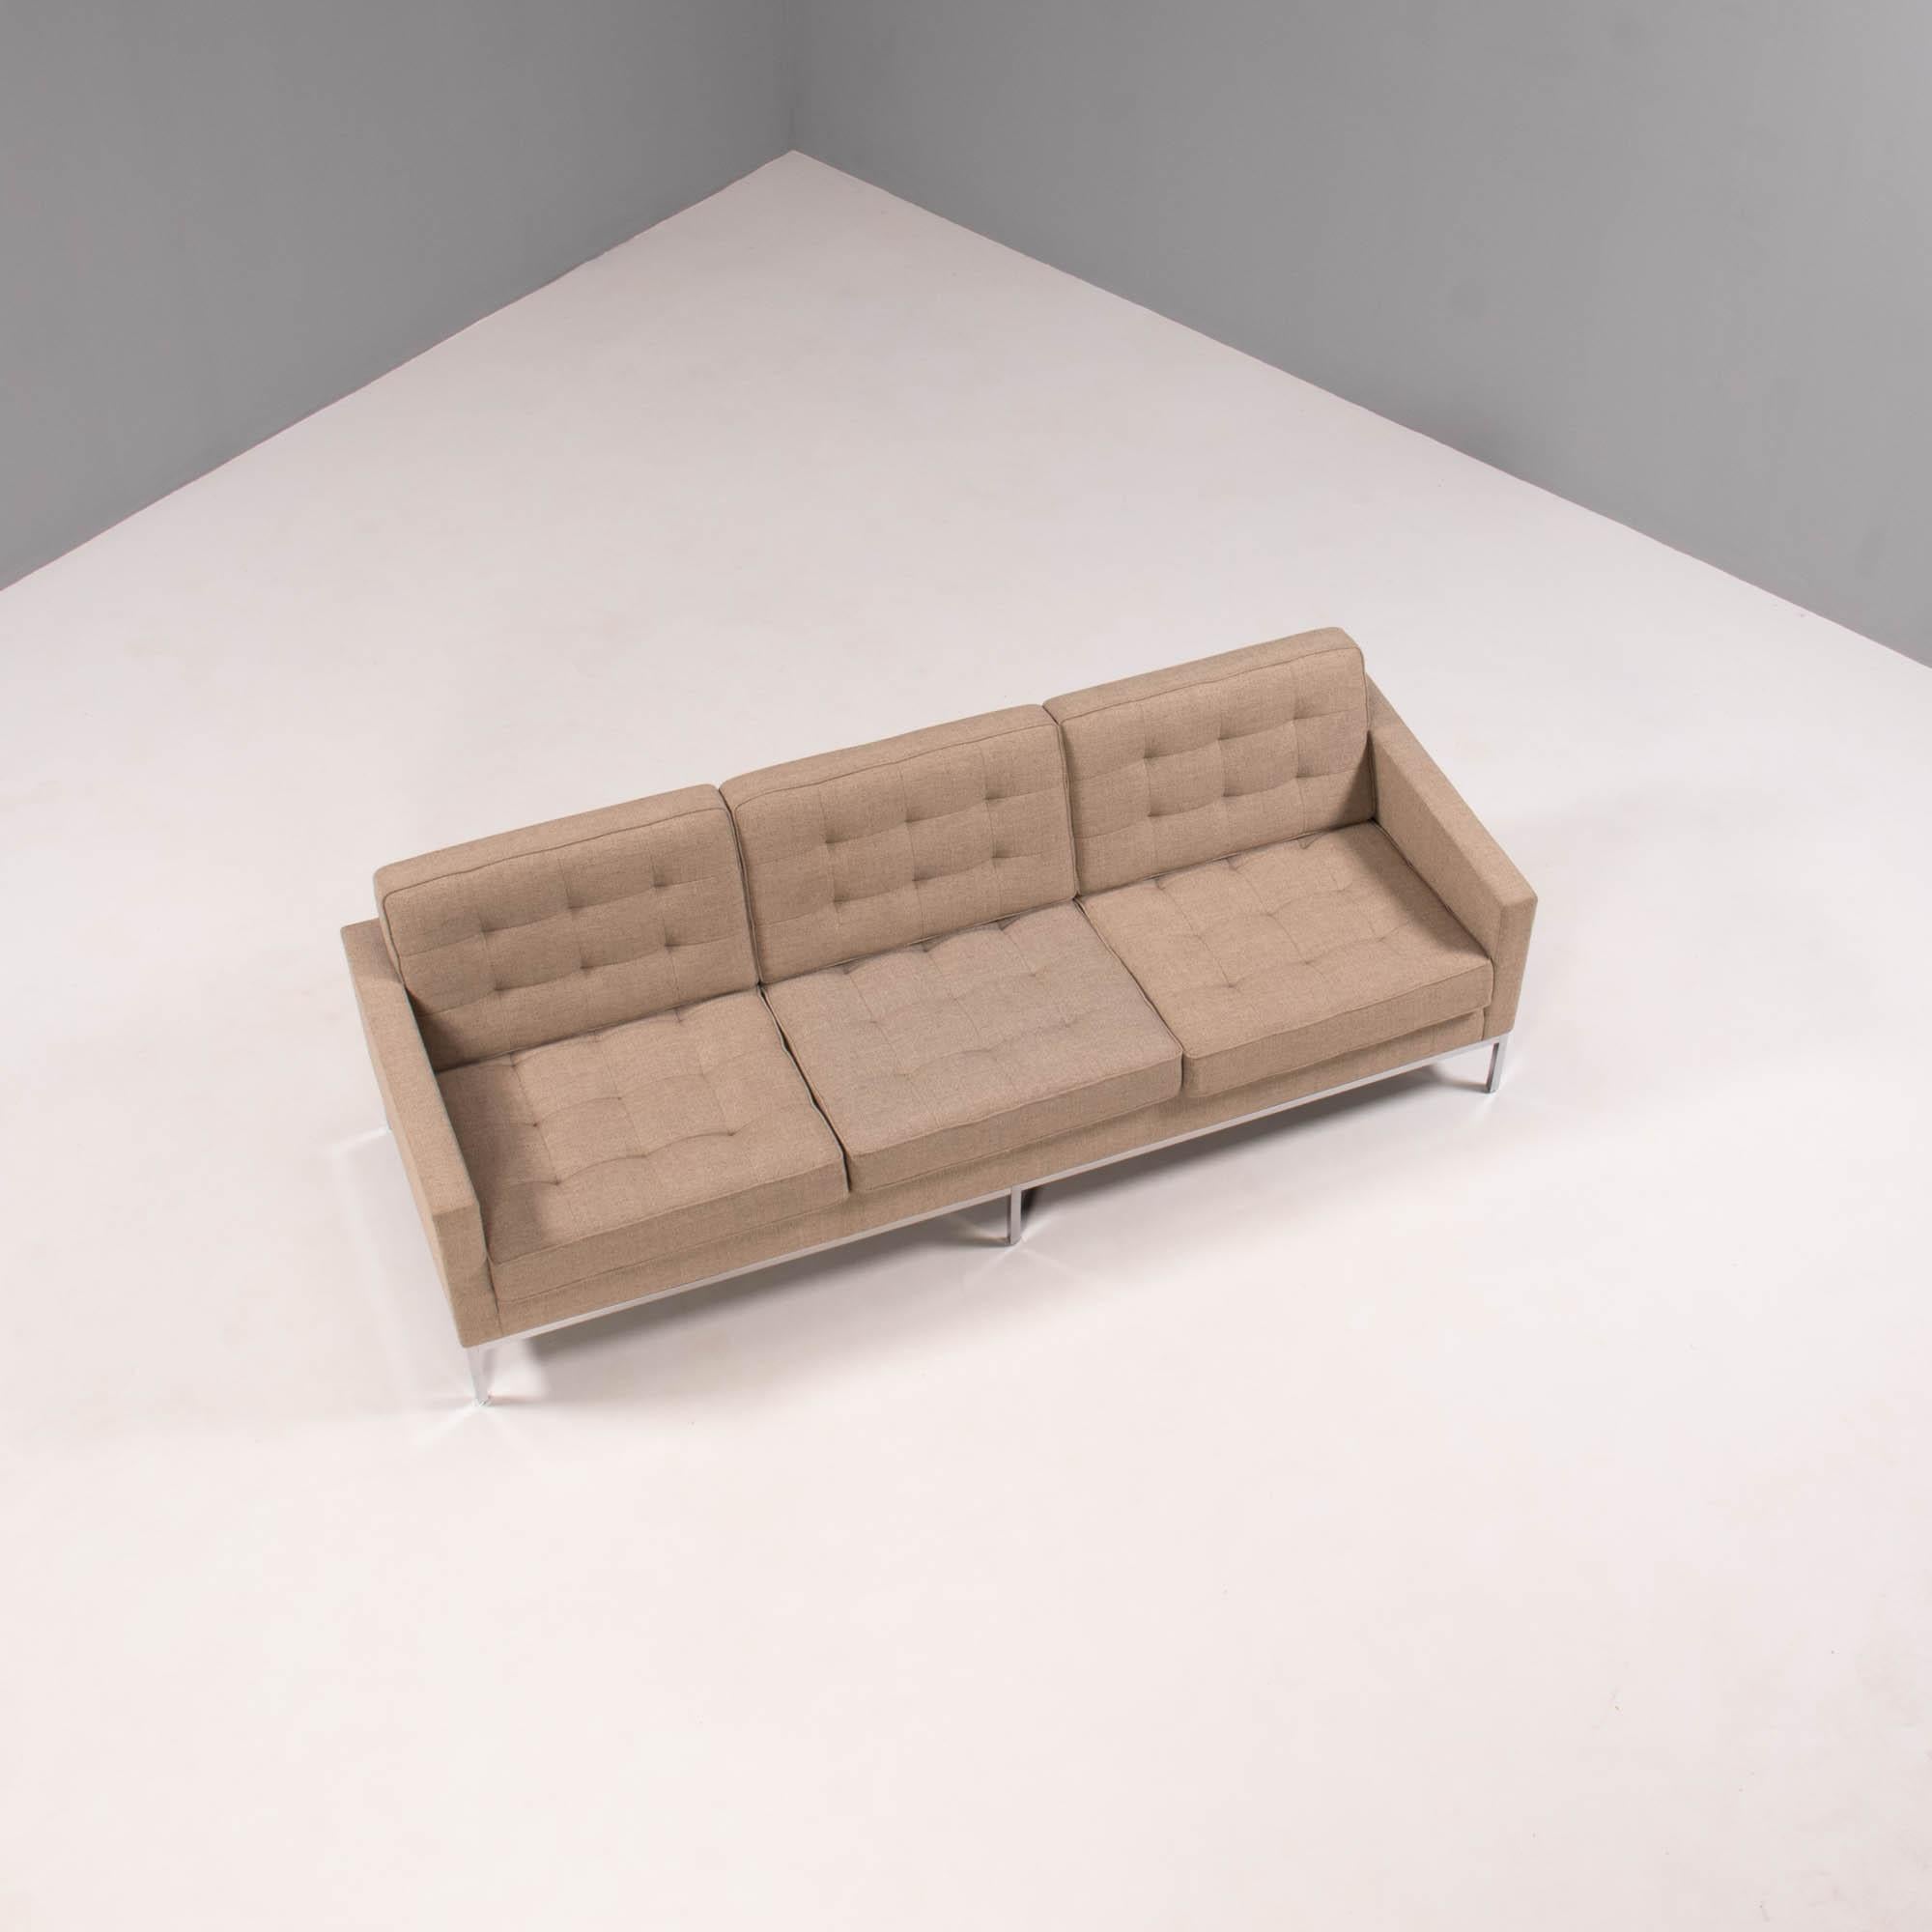 Originally designed by Florence Knoll in 1954, this sofa is a fantastic example of the modern aesthetic of the era.

The design has since been updated to the Relaxed model which offers deeper seating and more comfort while maintaining the original